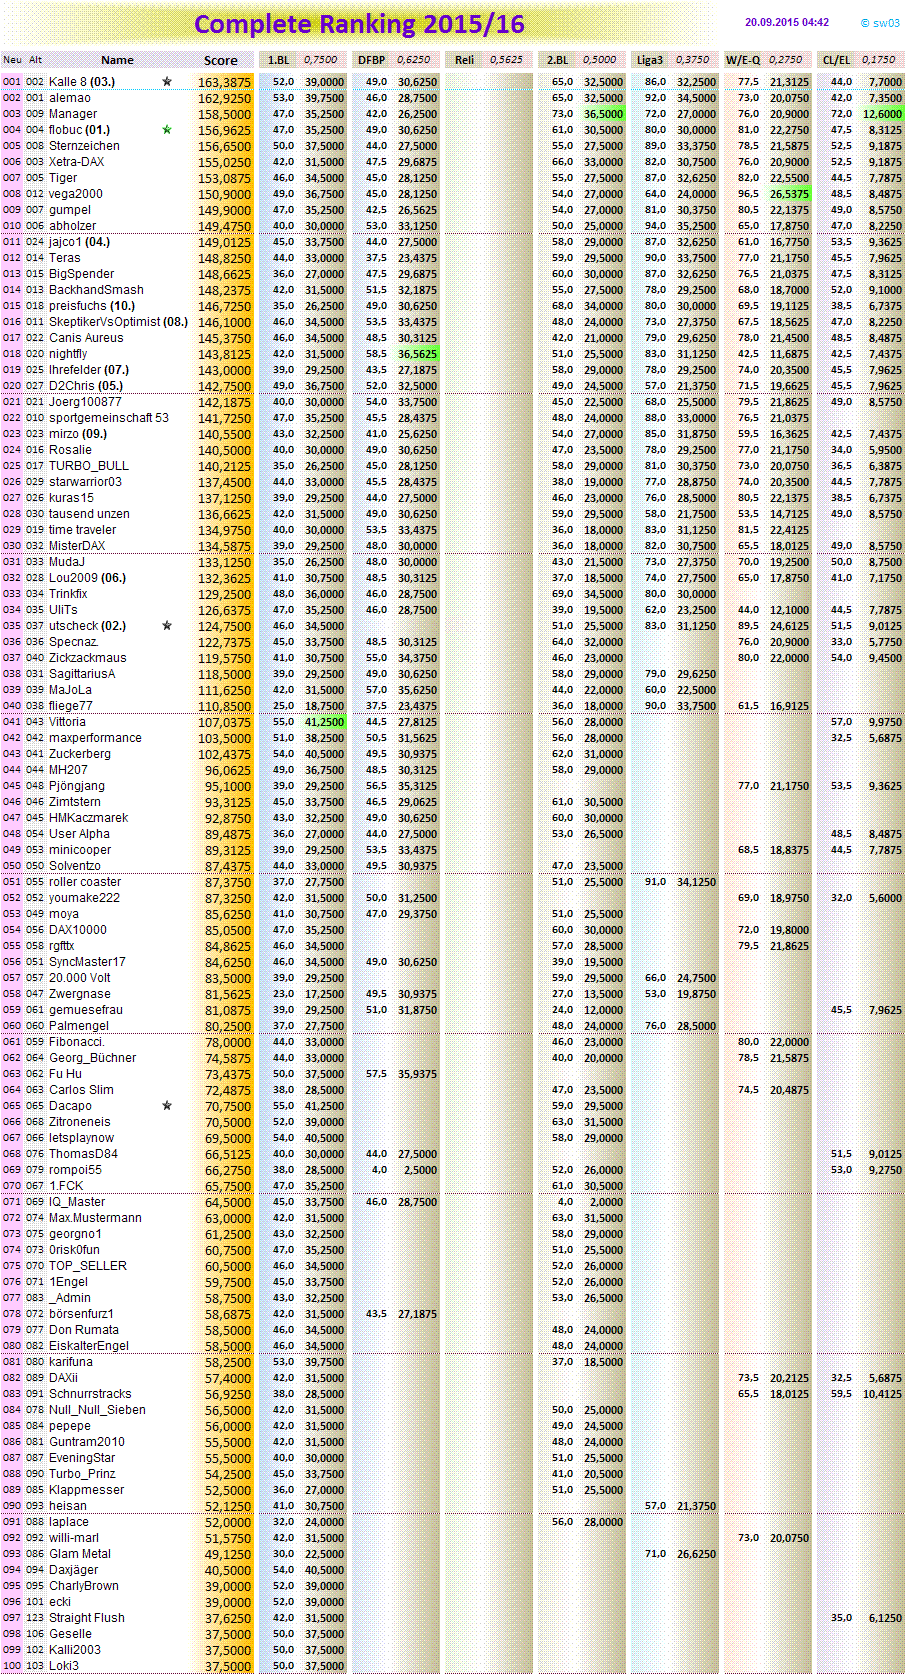 completeranking2015-16.png